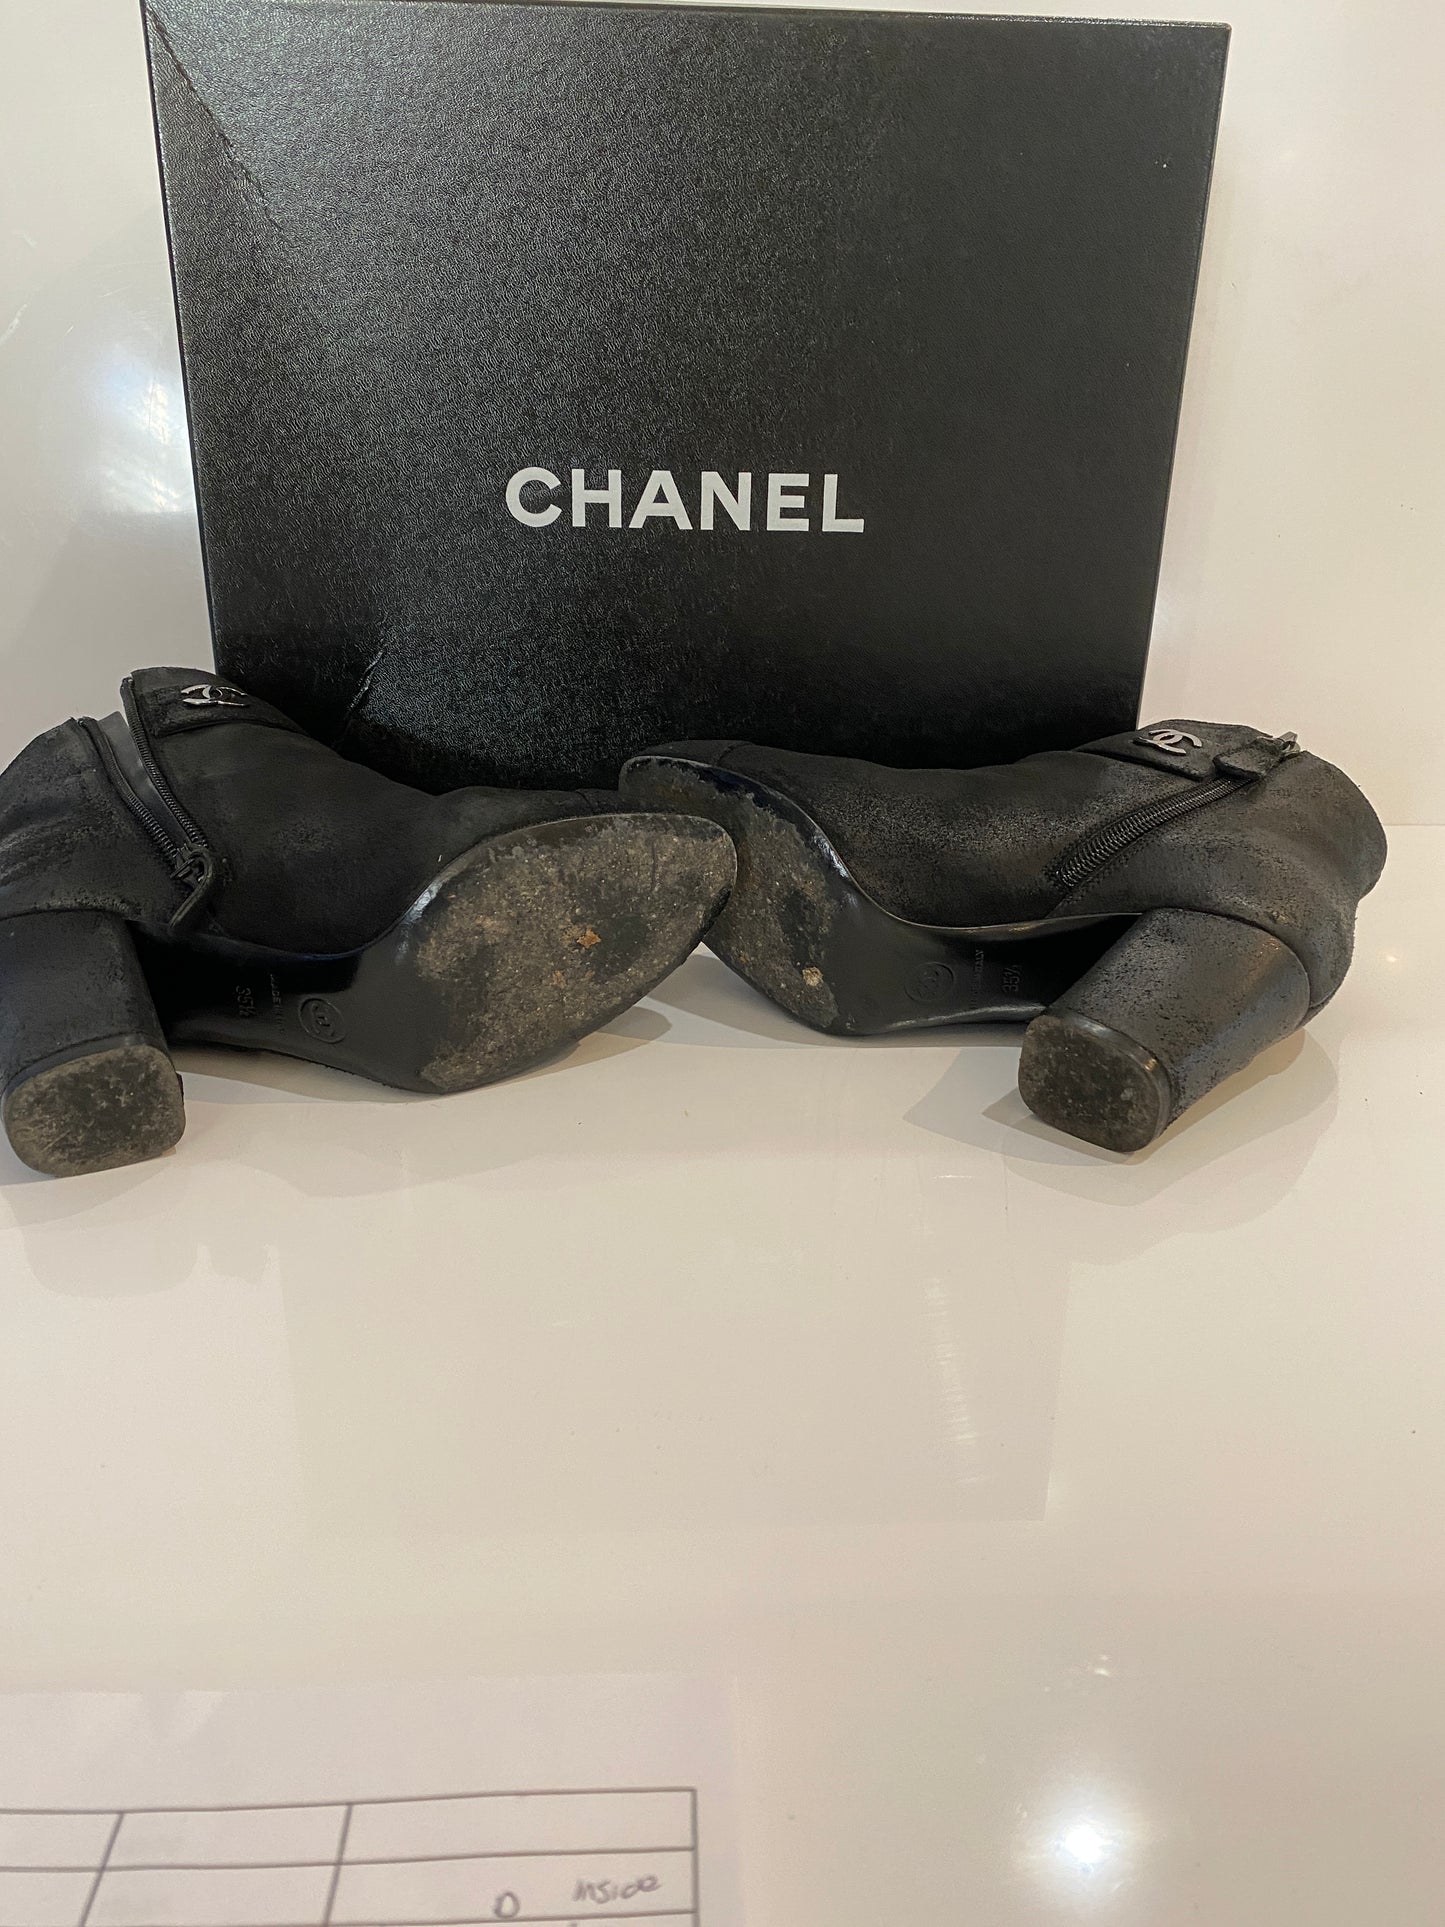 CHANEL BLACK CC ANKLE BOOTS - SIZE 35.5 / 2.5 UK BOXED